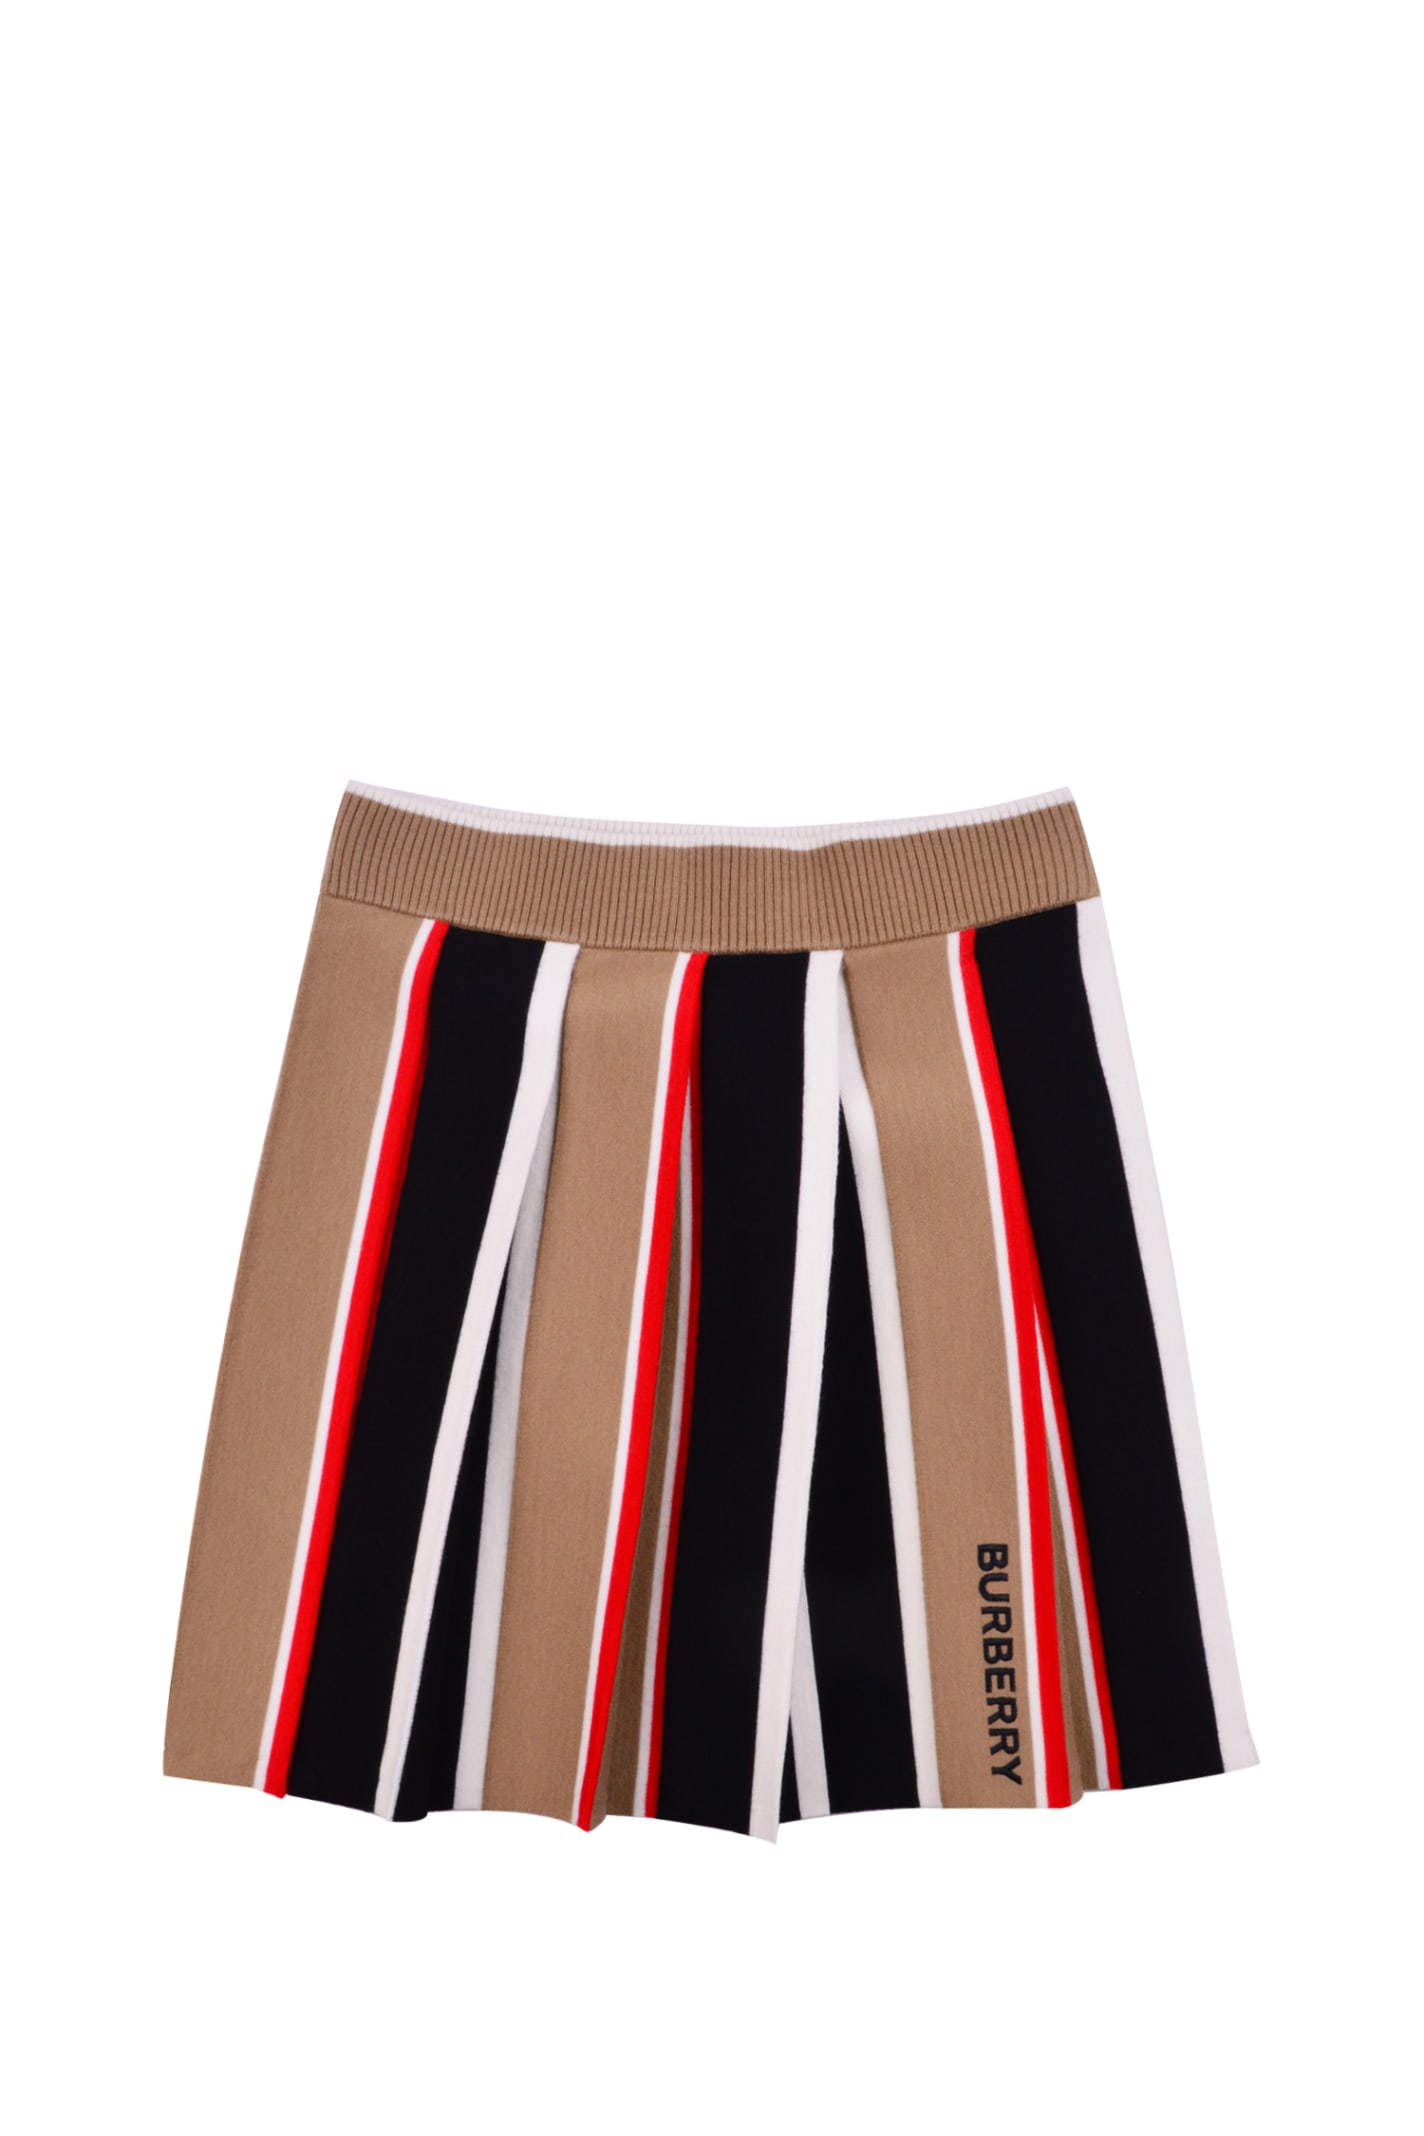 BURBERRY STRIPED SKIRT WITH LOGO EMBROIDERY